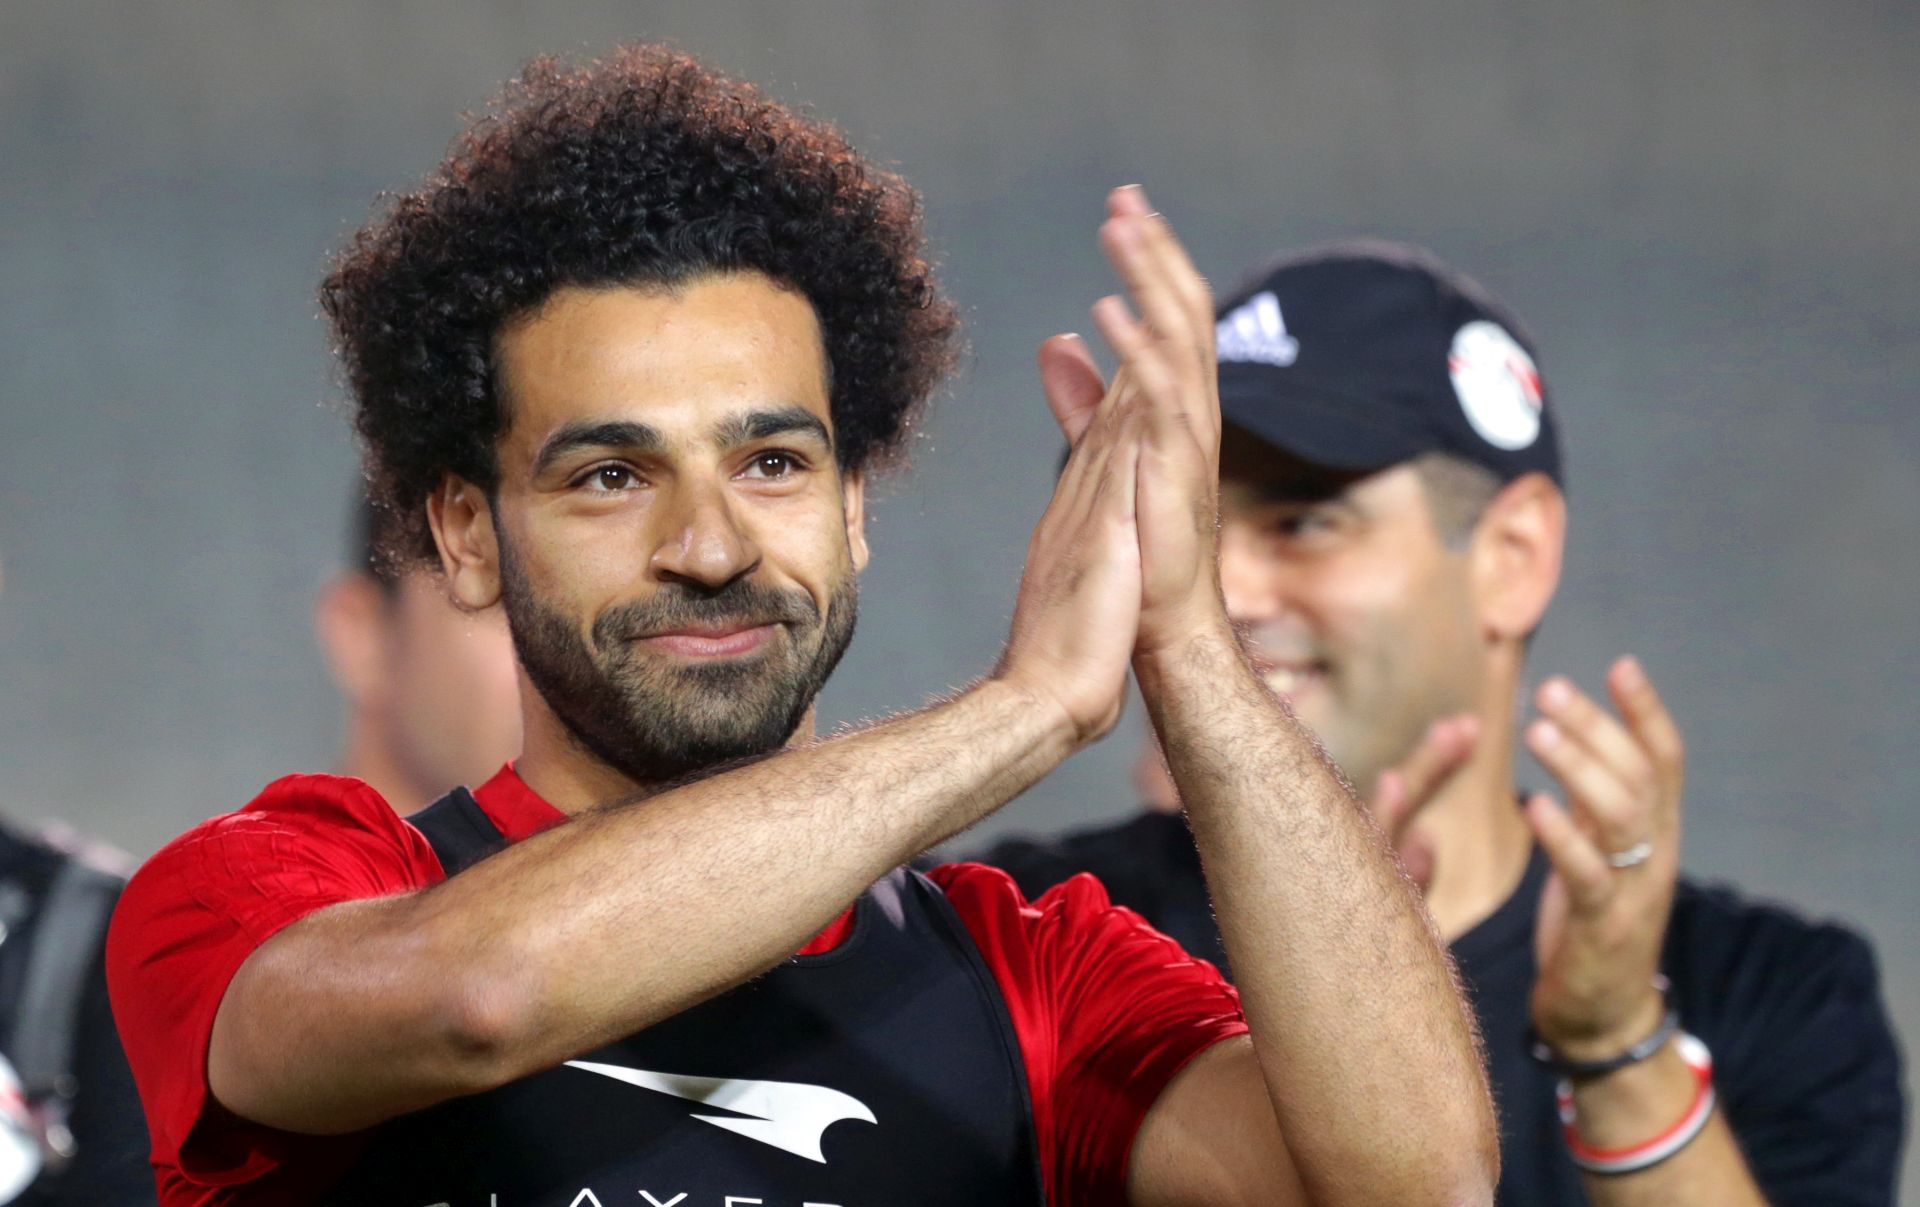 epa06797679 Egyptian national soccer team striker Mohamed Salah (L) attends his team's training session at Cairo international stadium in Cairo, Egypt, 09 June 2018. The Egyptian national soccer team prepares for the FIFA World Cup 2018 taking place in Russia from 14 June to 15 July 2018.  EPA/KHALED ELFIQI